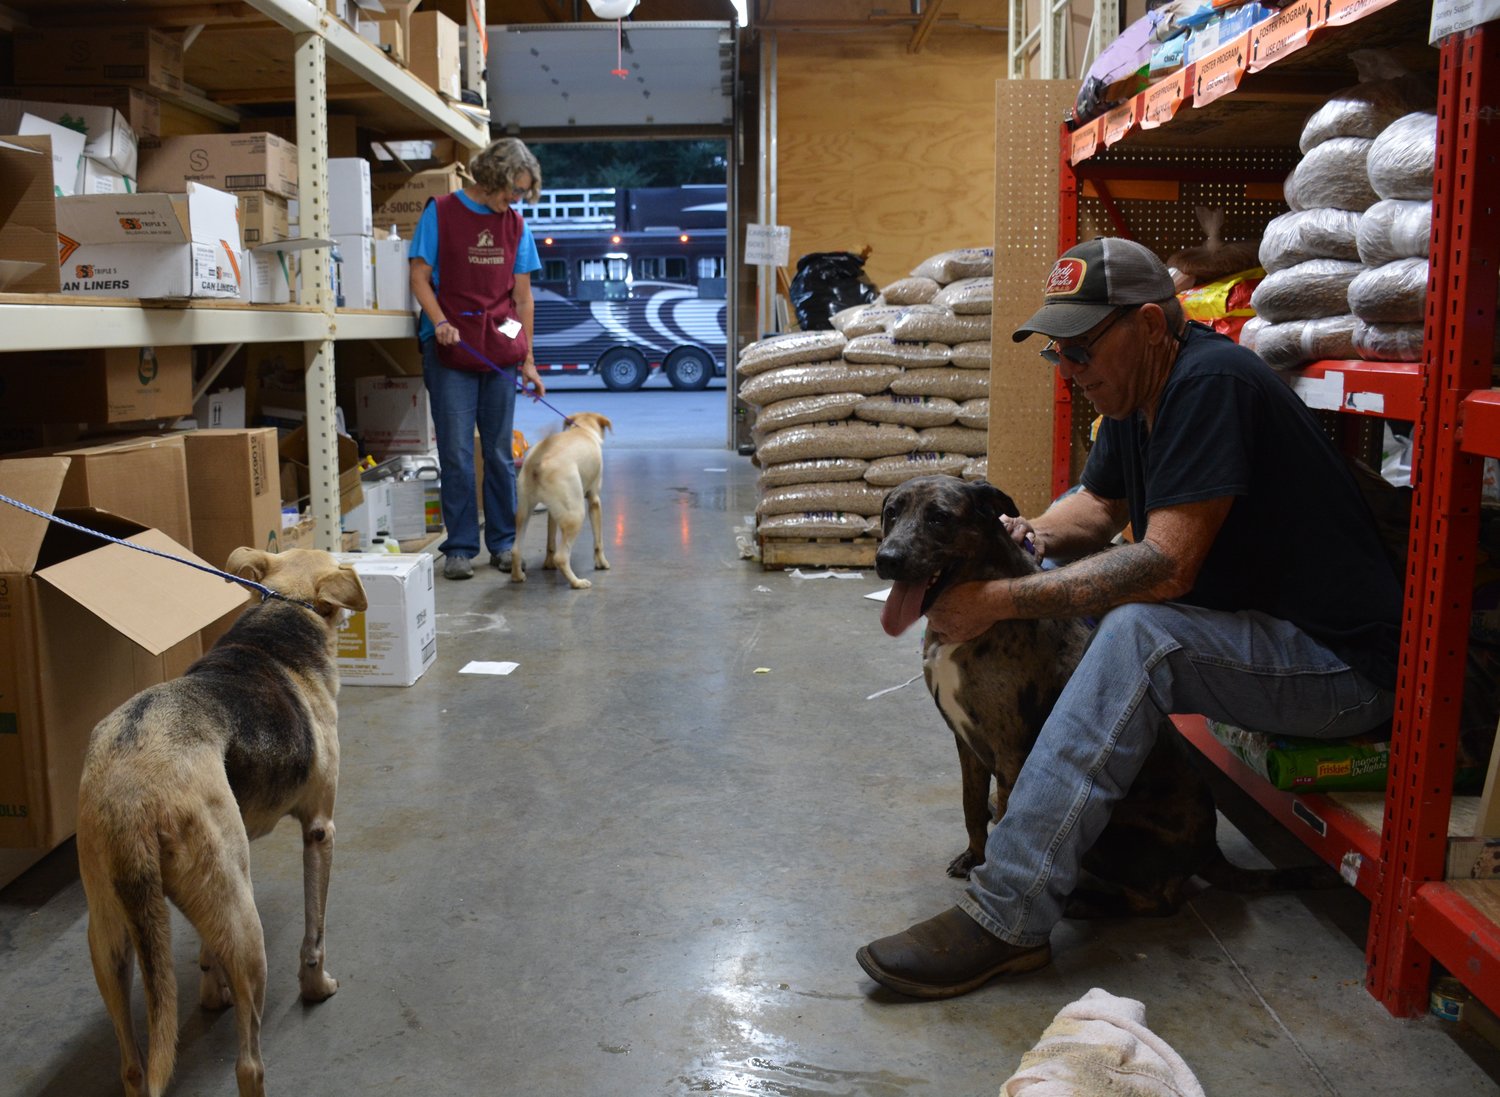 Volunteer Philip Stockard, right, along with a Humane Society of Southwest Washington volunteer, handles dogs from Texas brought to the shelter to free up space at shelters close to the area where Hurricane Harvey hit.